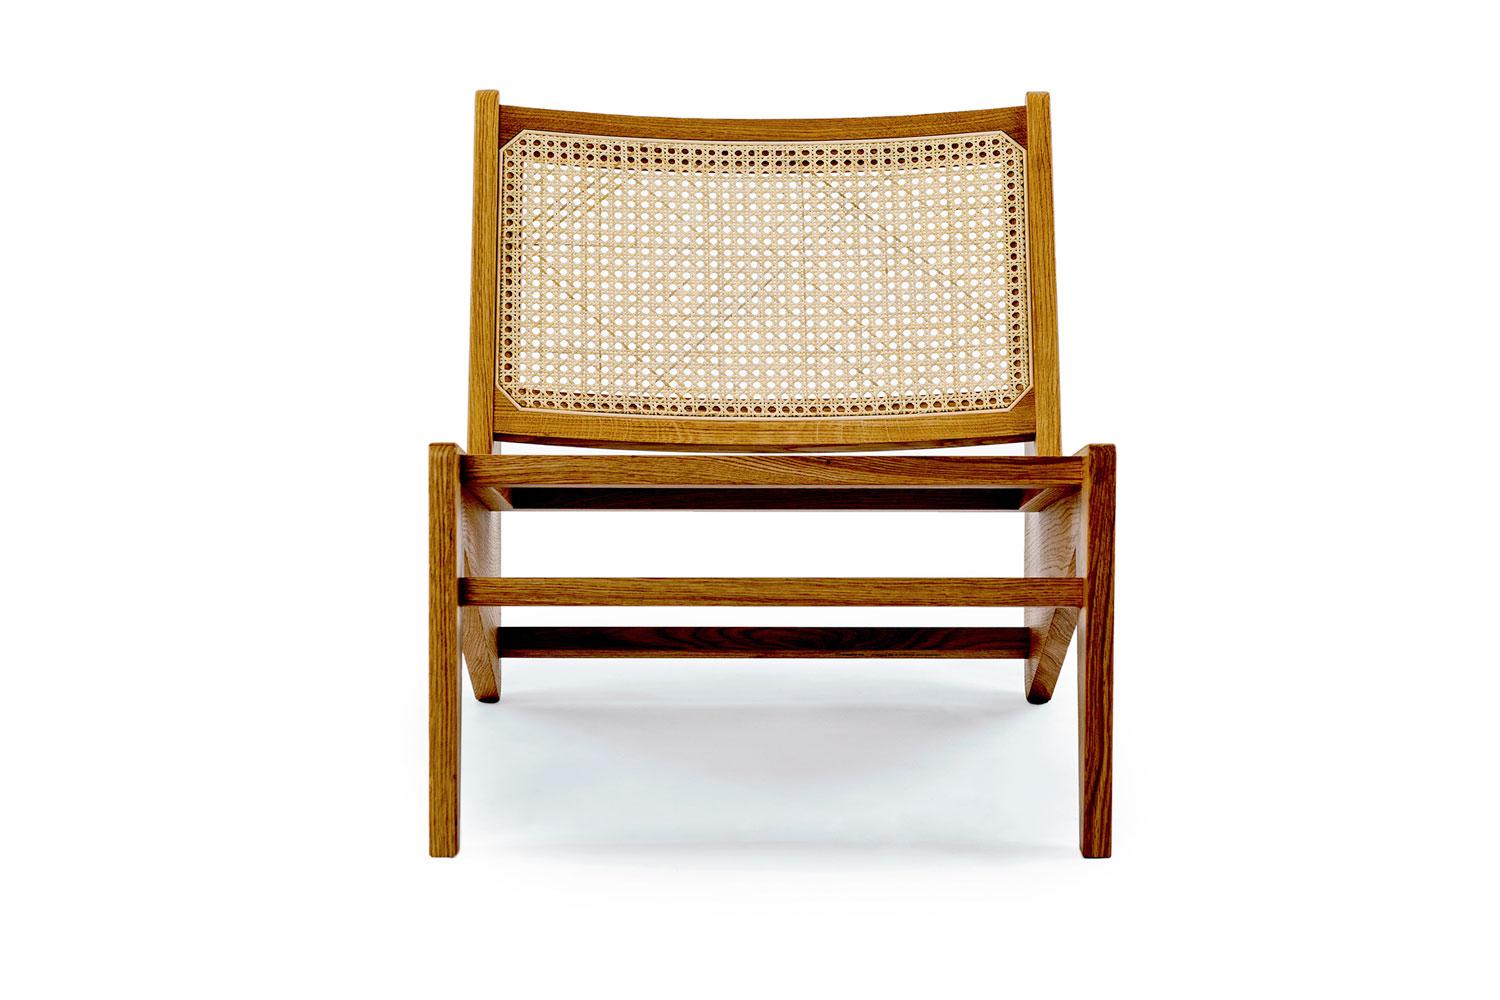 Kangaroo chair by Cassina

Hommage À Pierre Jeanneret

This Kangaroo chair frame is in oak wood with woven Viennese cane seat and back and is a licensed reissue of the legendary original model revisited by Cassina.Cassina continues its study of